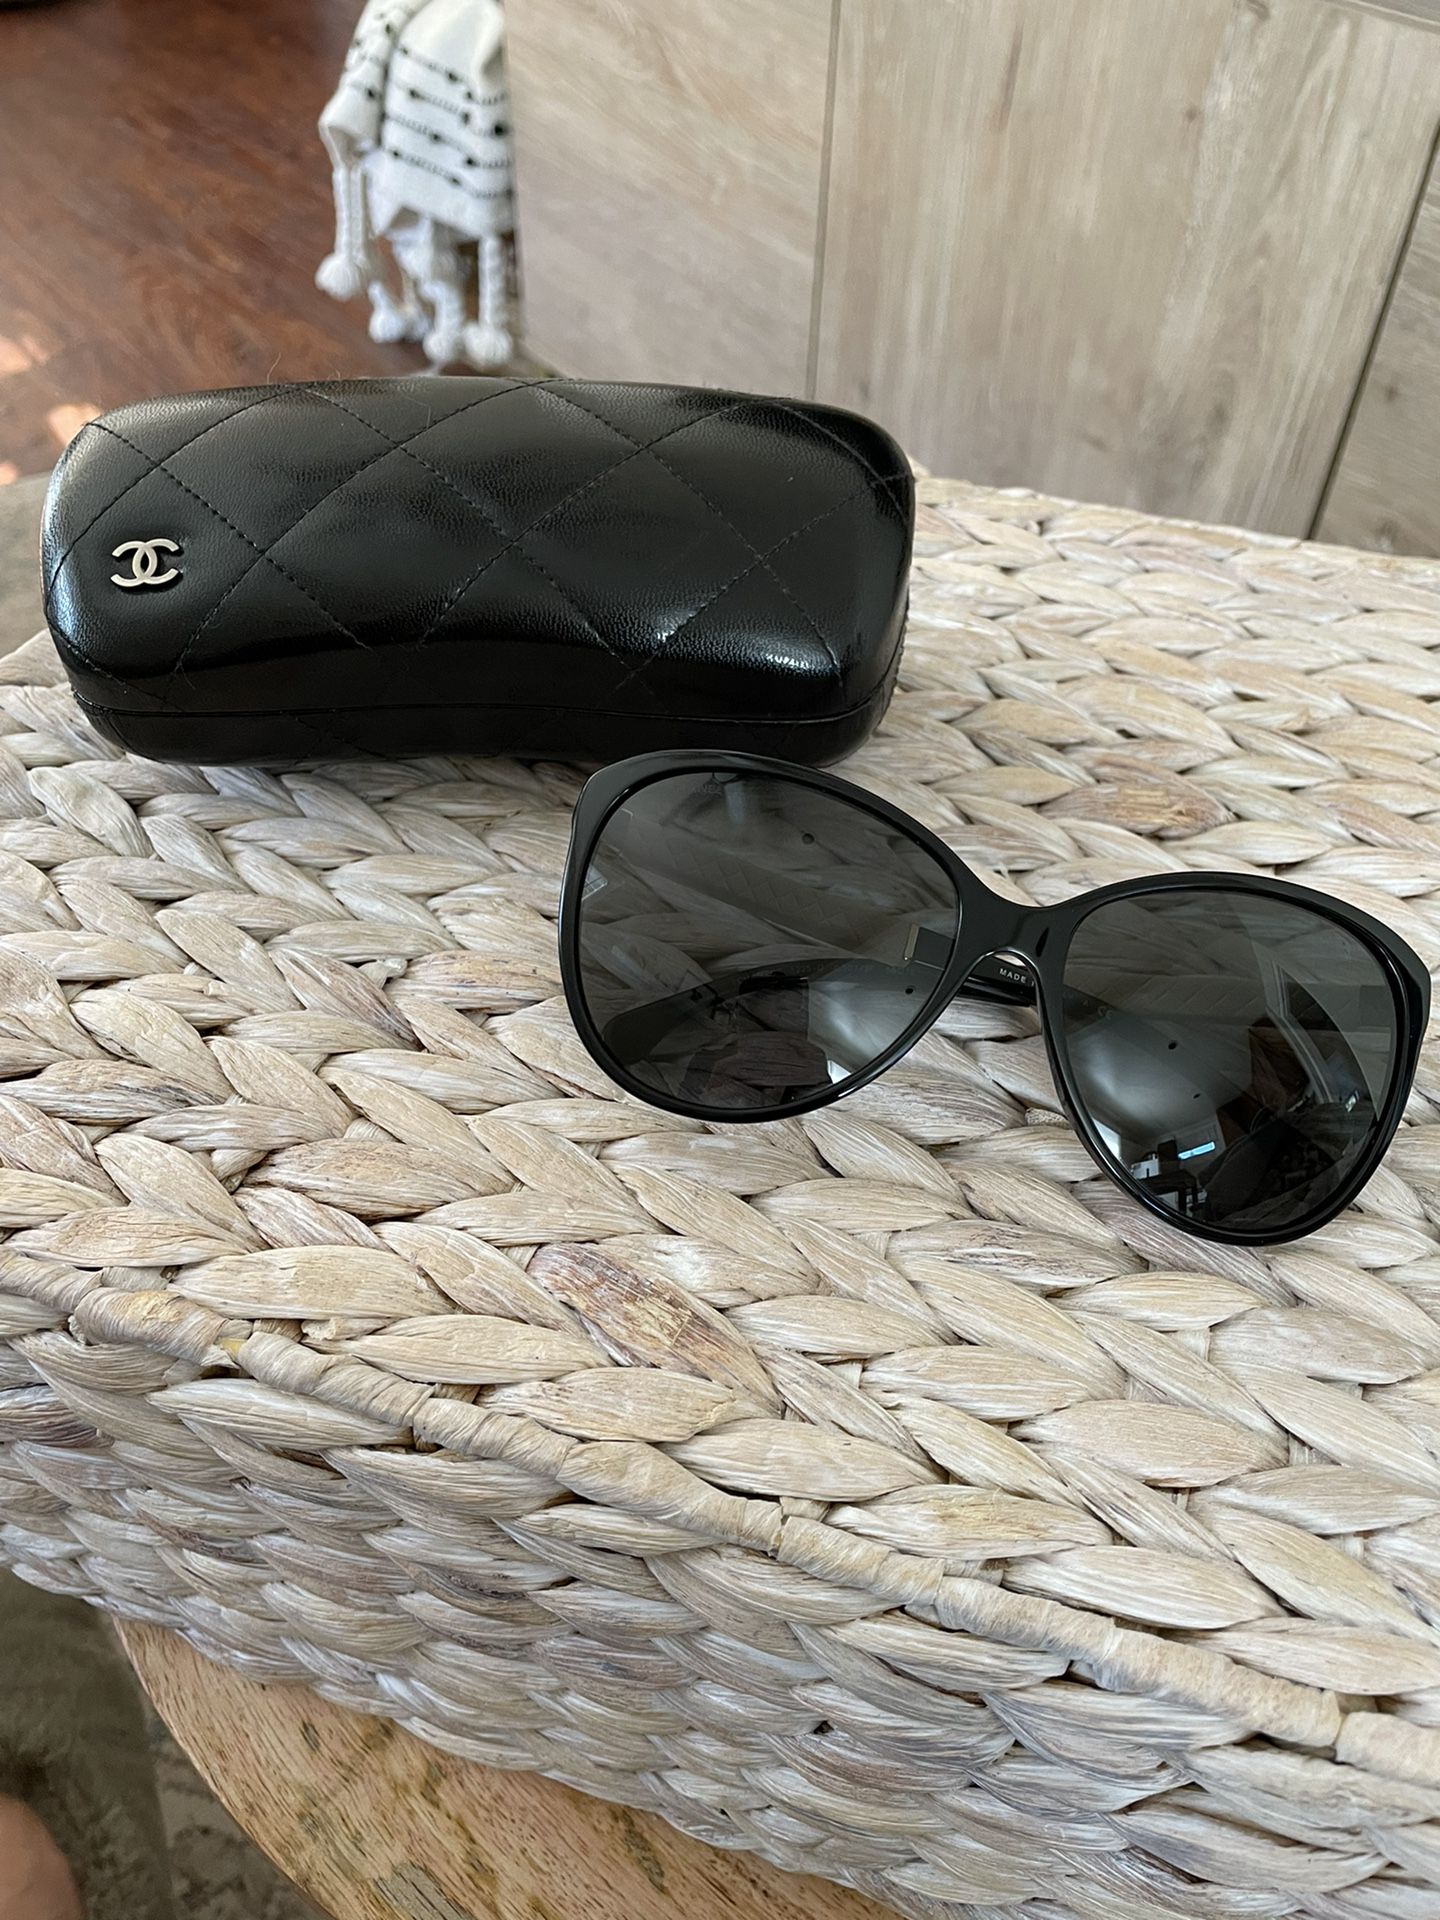 Chanel Red & Black Quilted Sunglasses